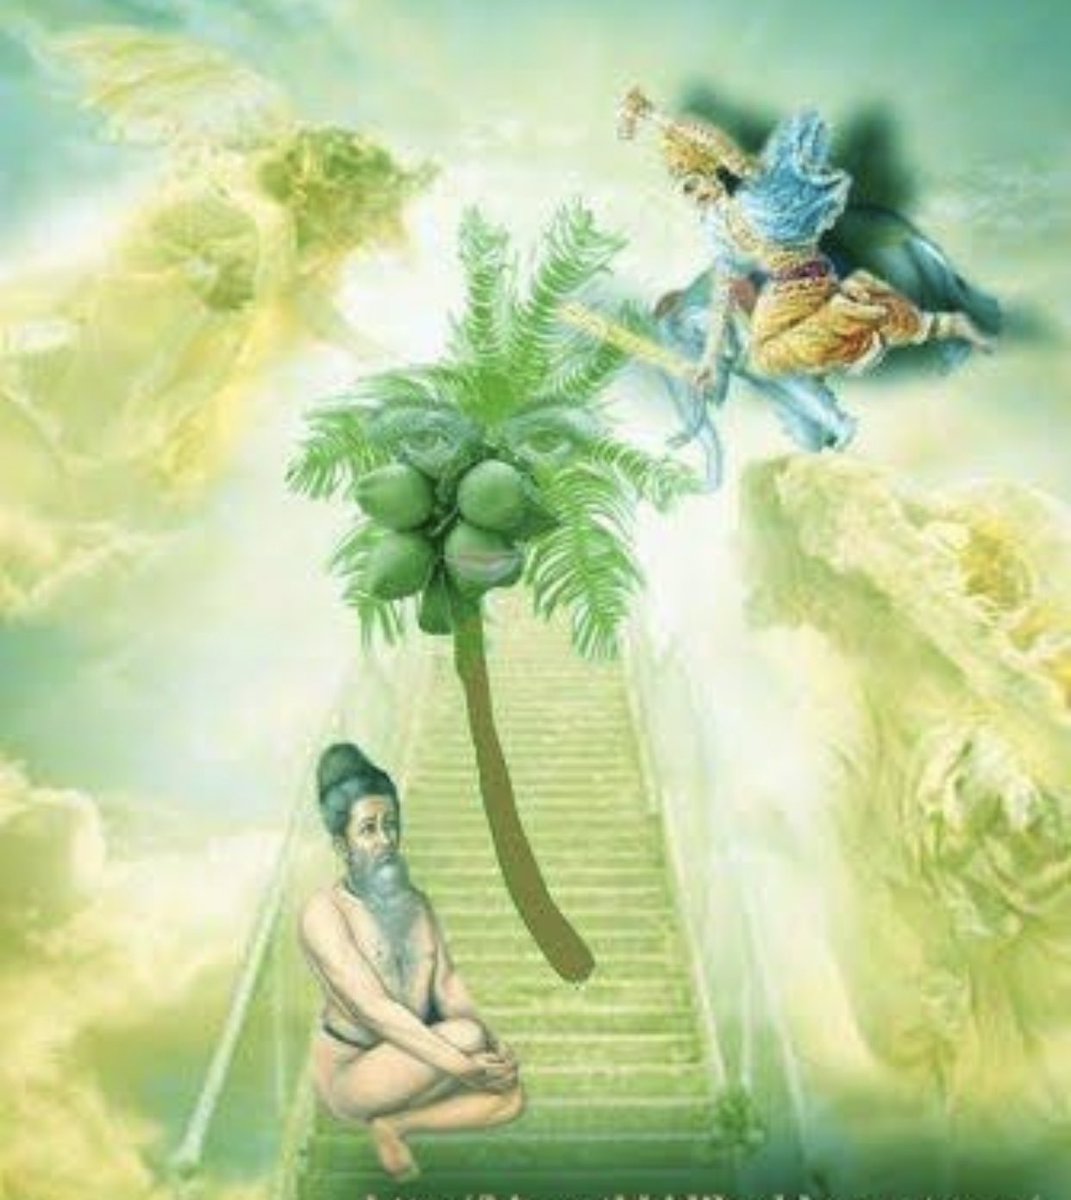 The Devas allowed Satyavrata to stay mid-air. However, the sage realised that Satyavrata would fall back to ground once the spell weakened. So, he held him with a long pole. In time this pole became the trunk of the coconut tree and Satyavrata’s head became the fruit.